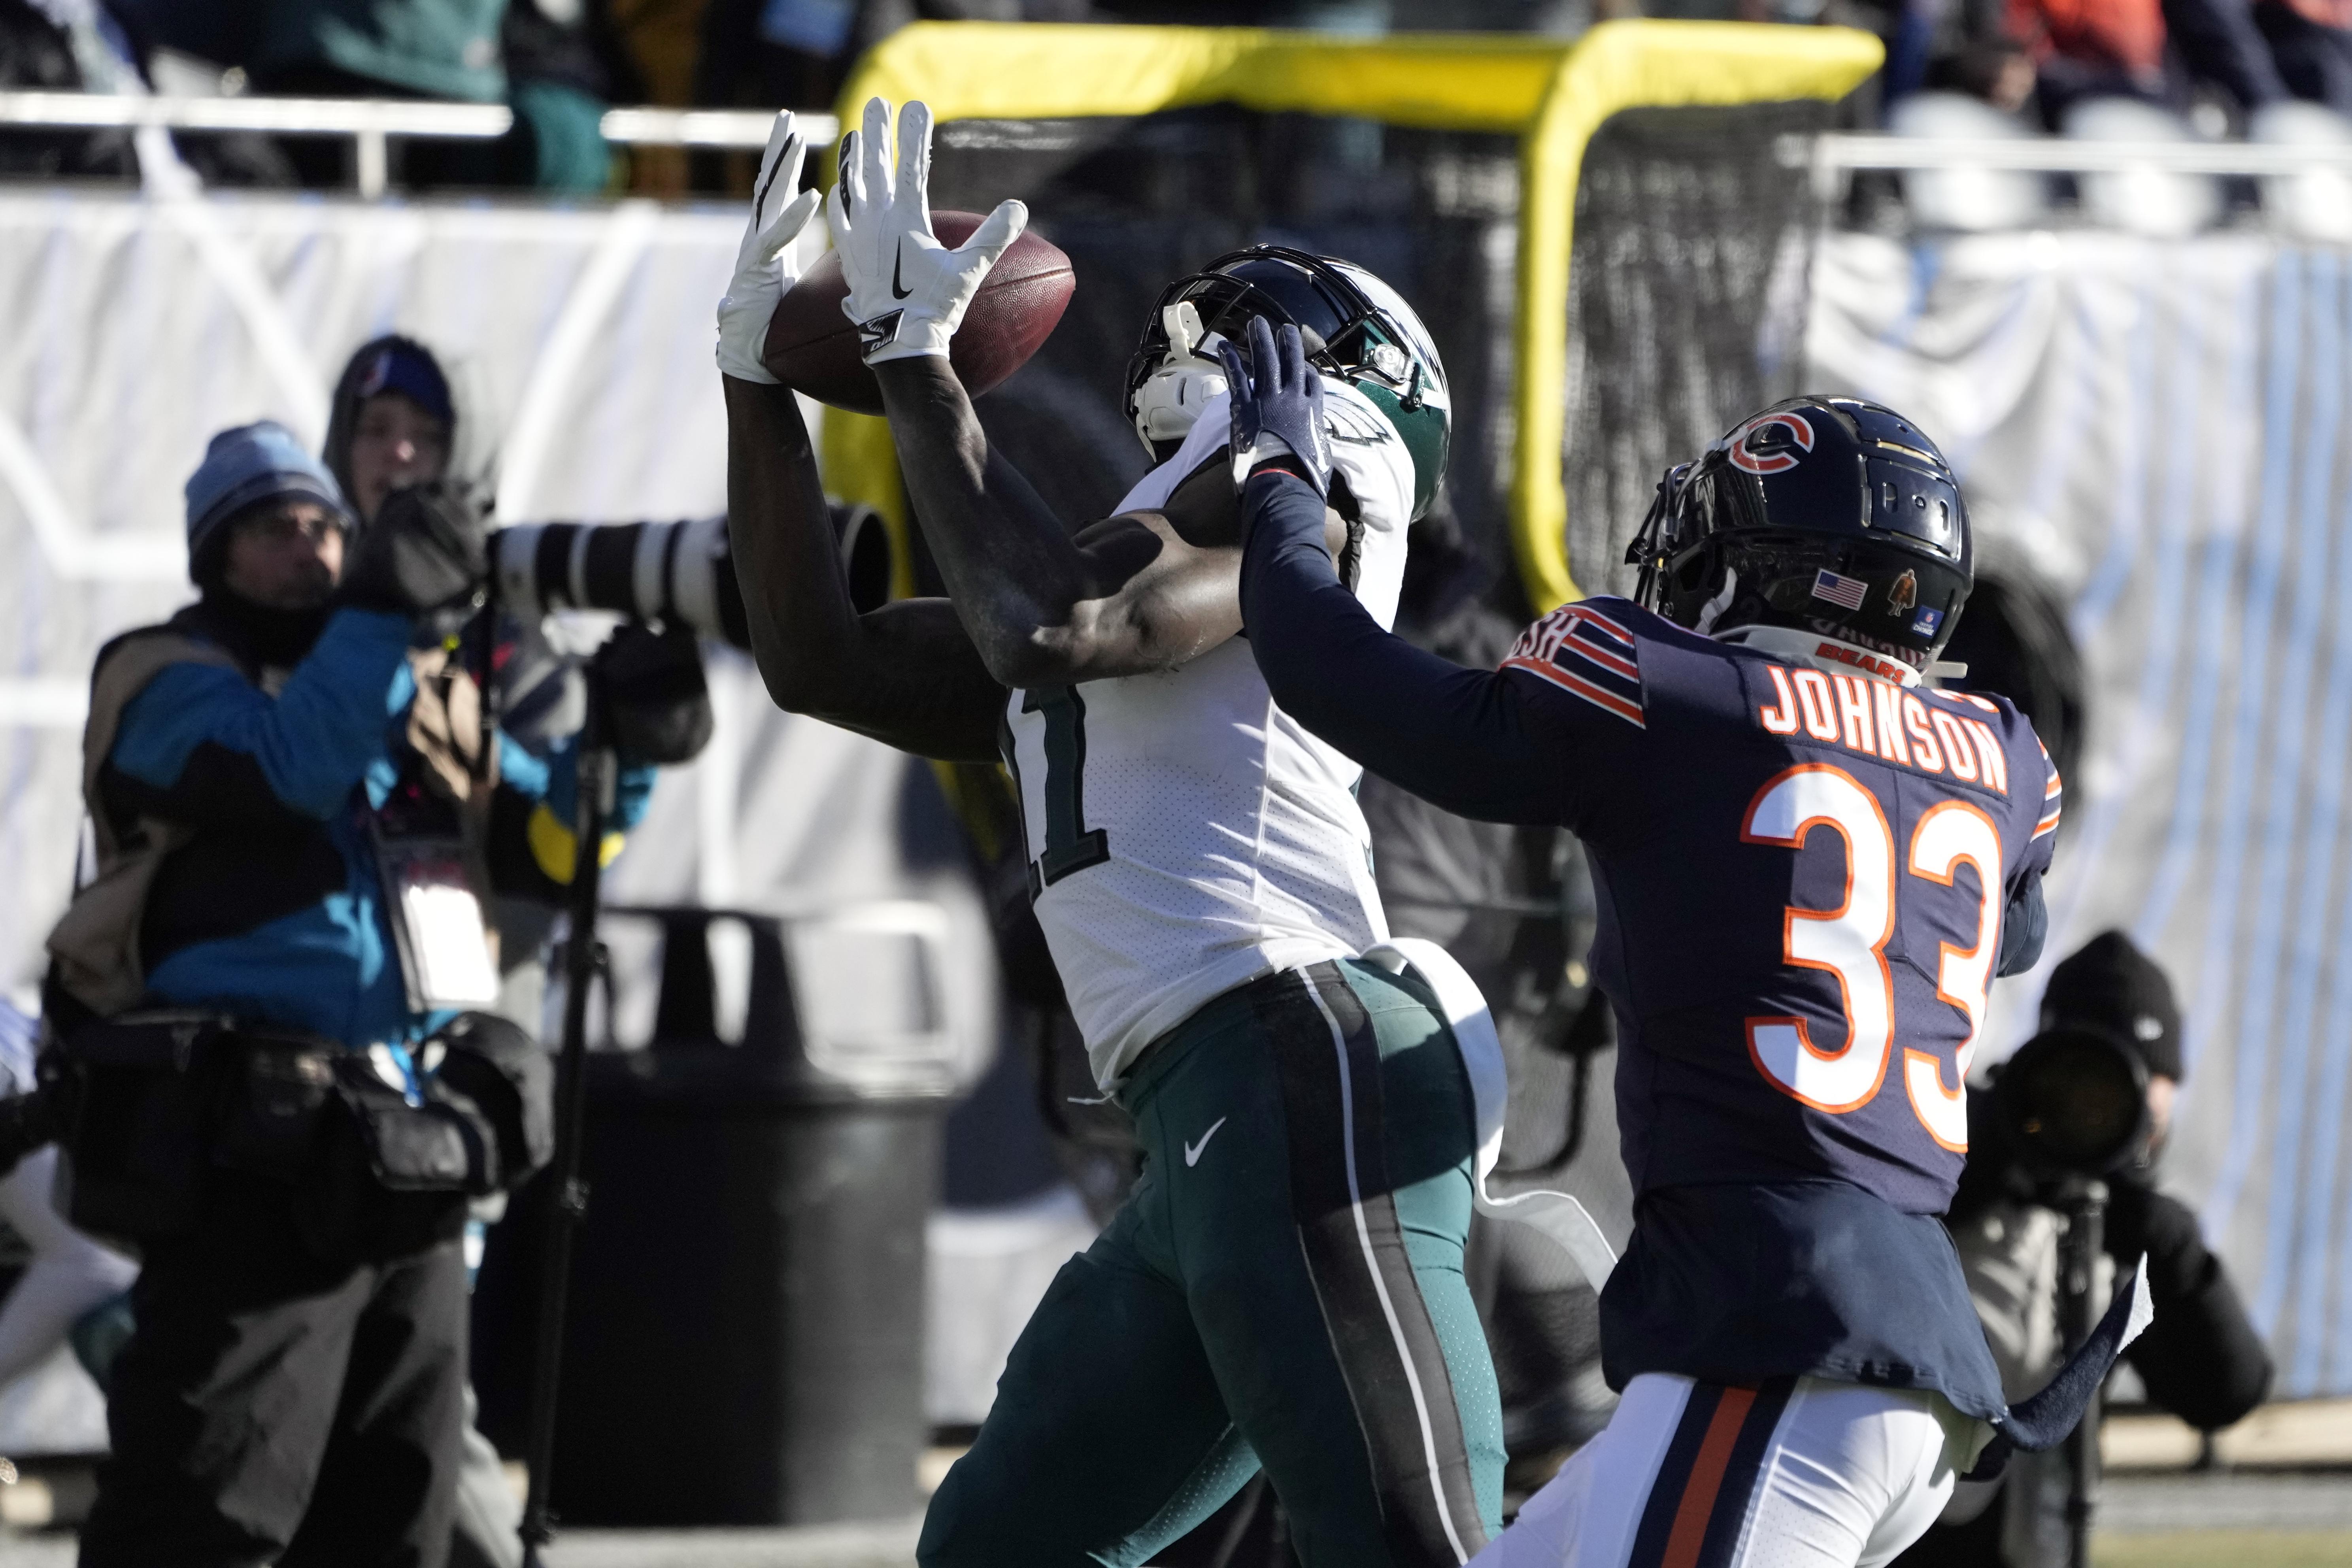 Bears CB Johnson questionable for Bills game with injury - Washington Times